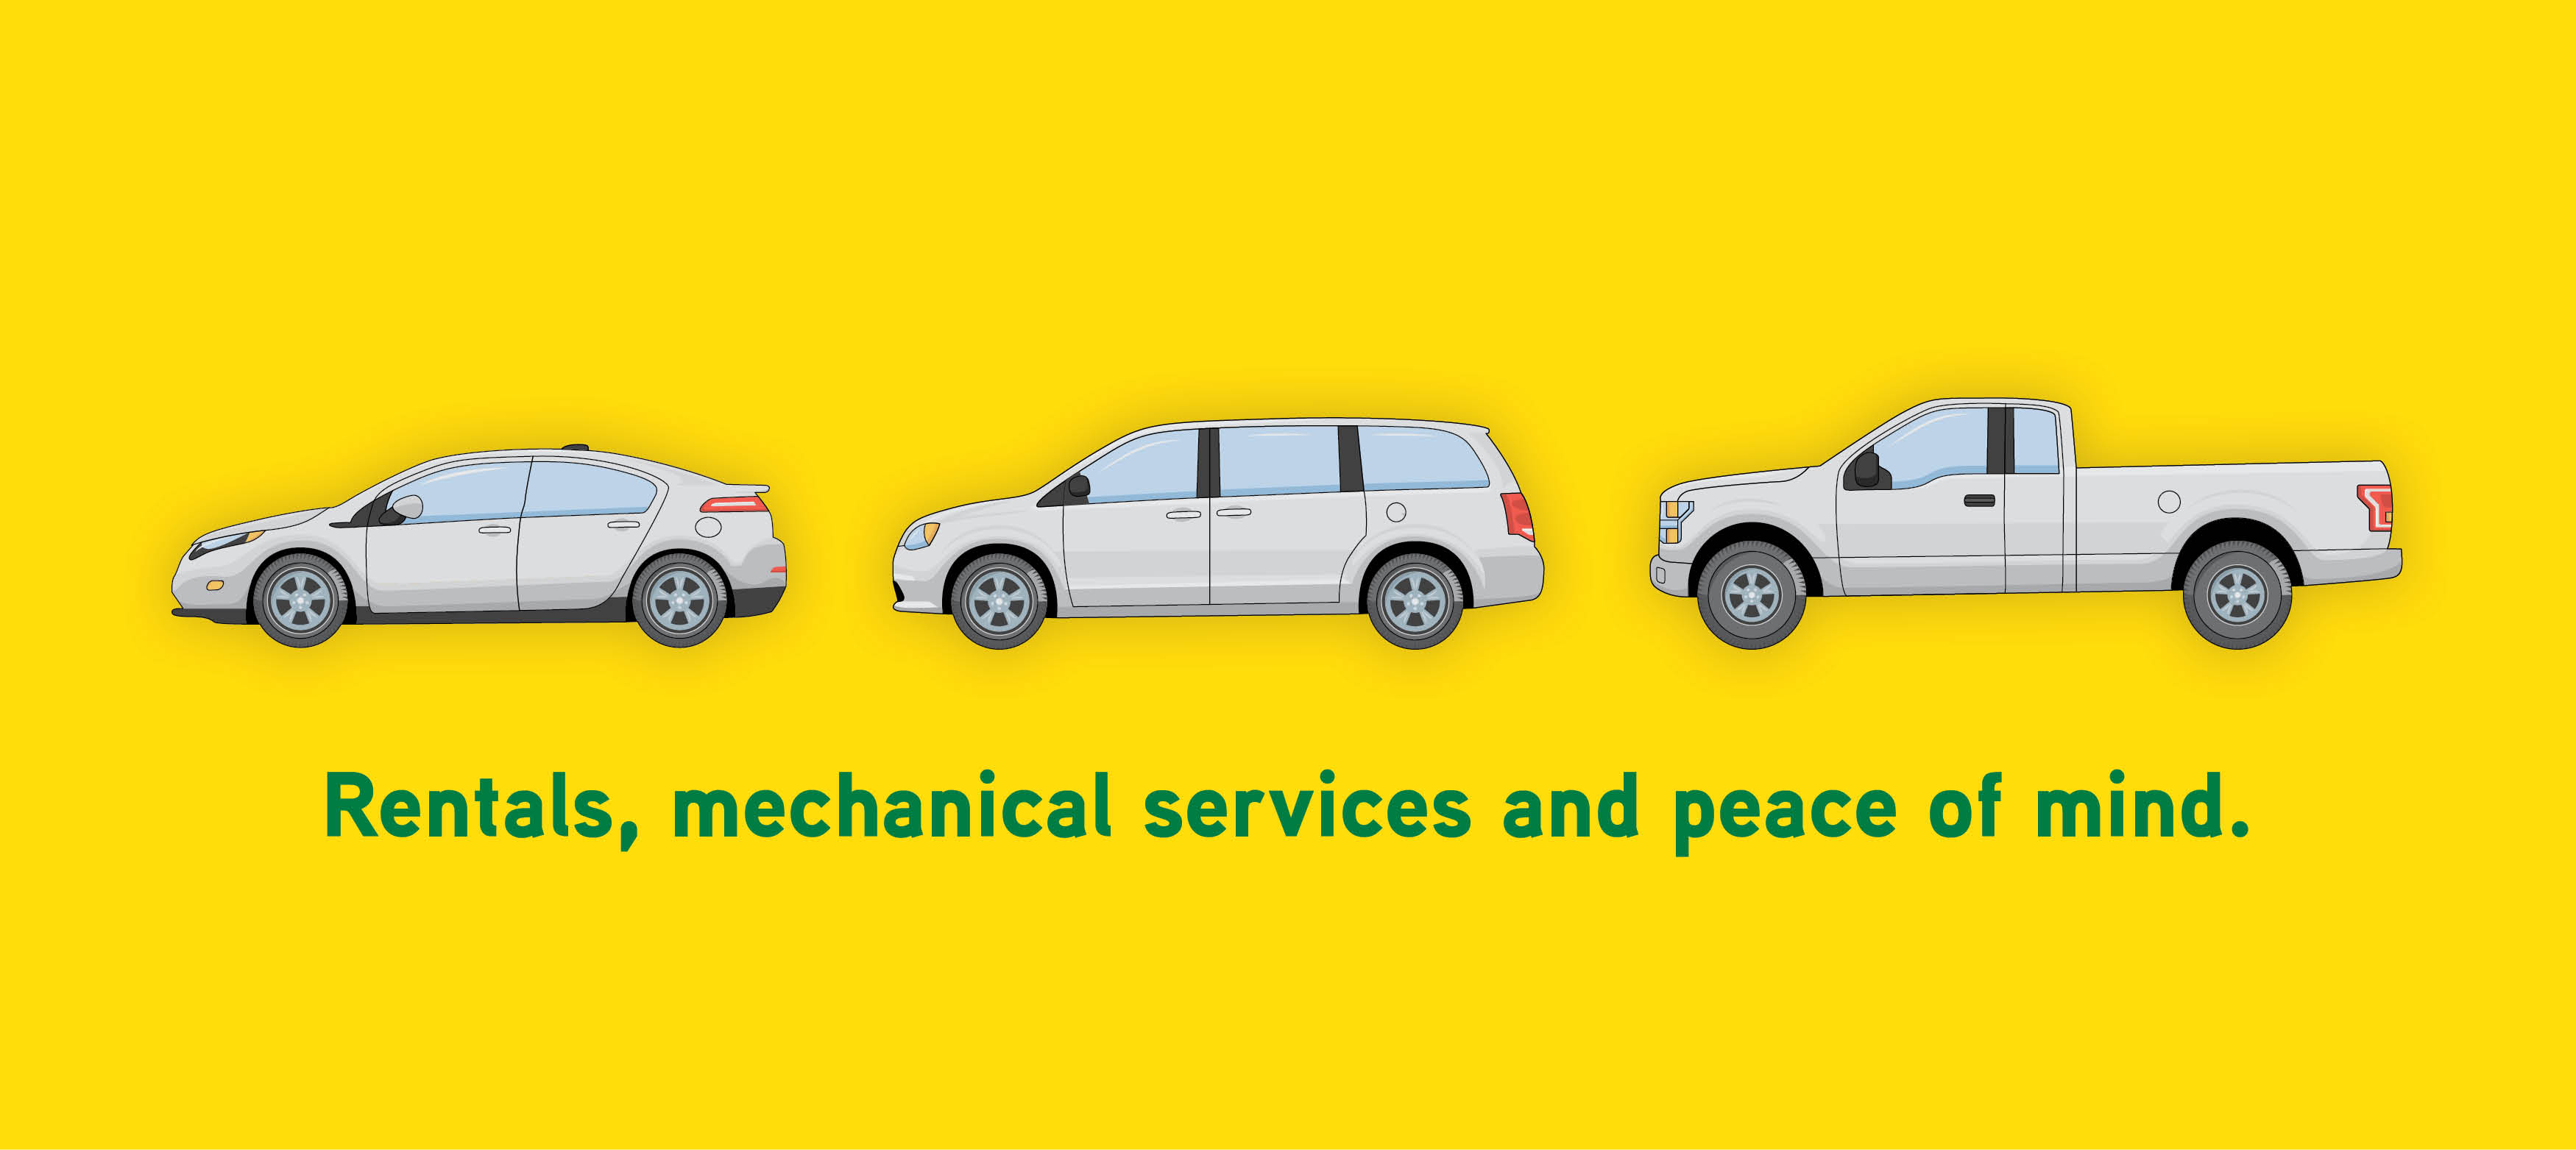 Rentals, mechanical services and peace of mind.